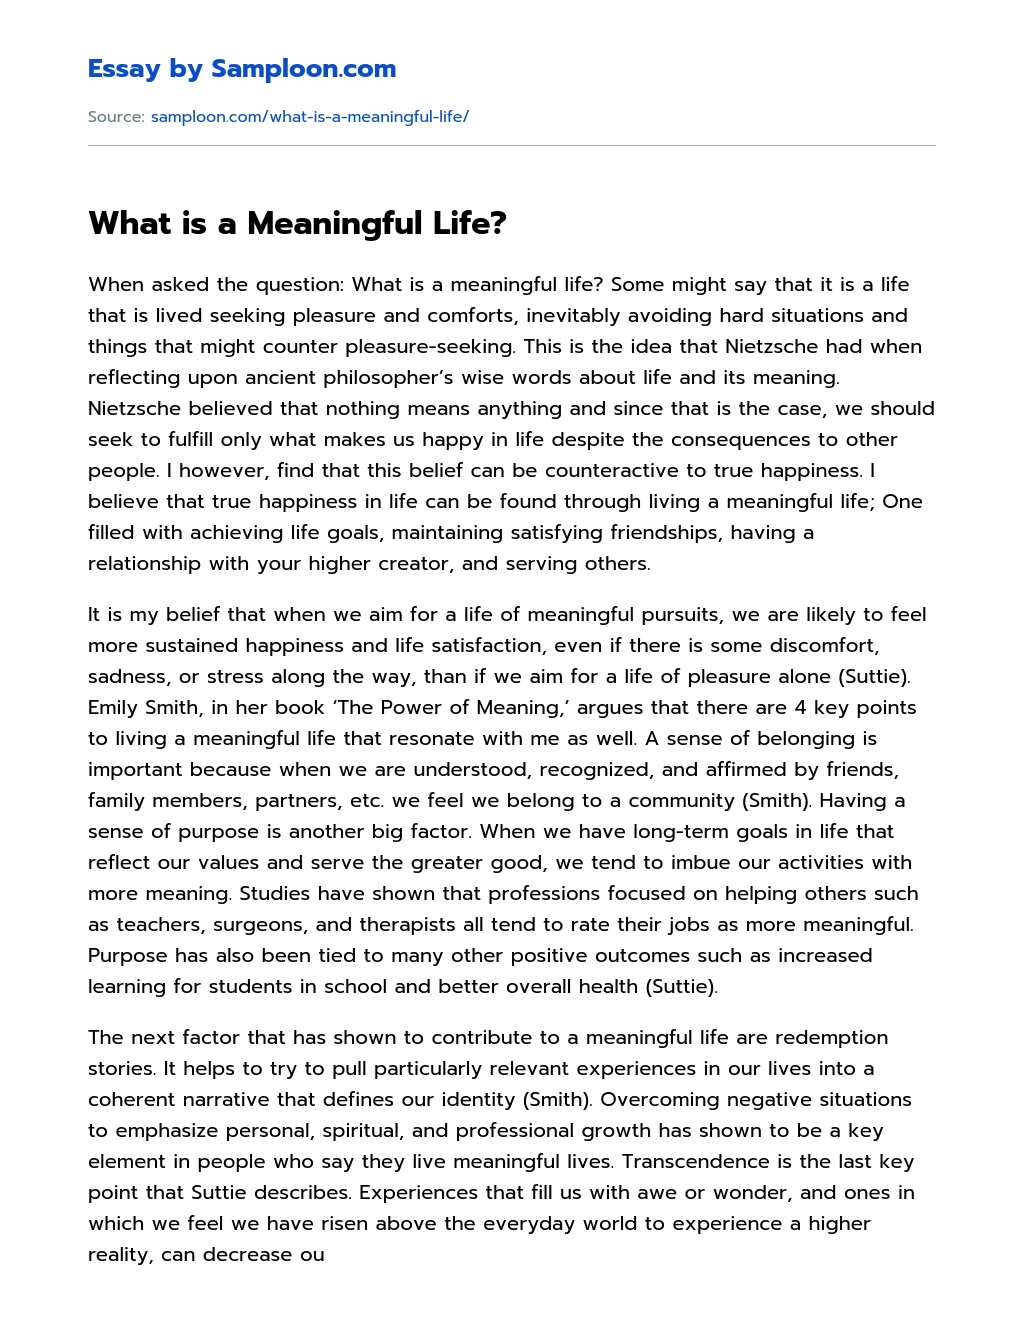 What is a Meaningful Life? essay